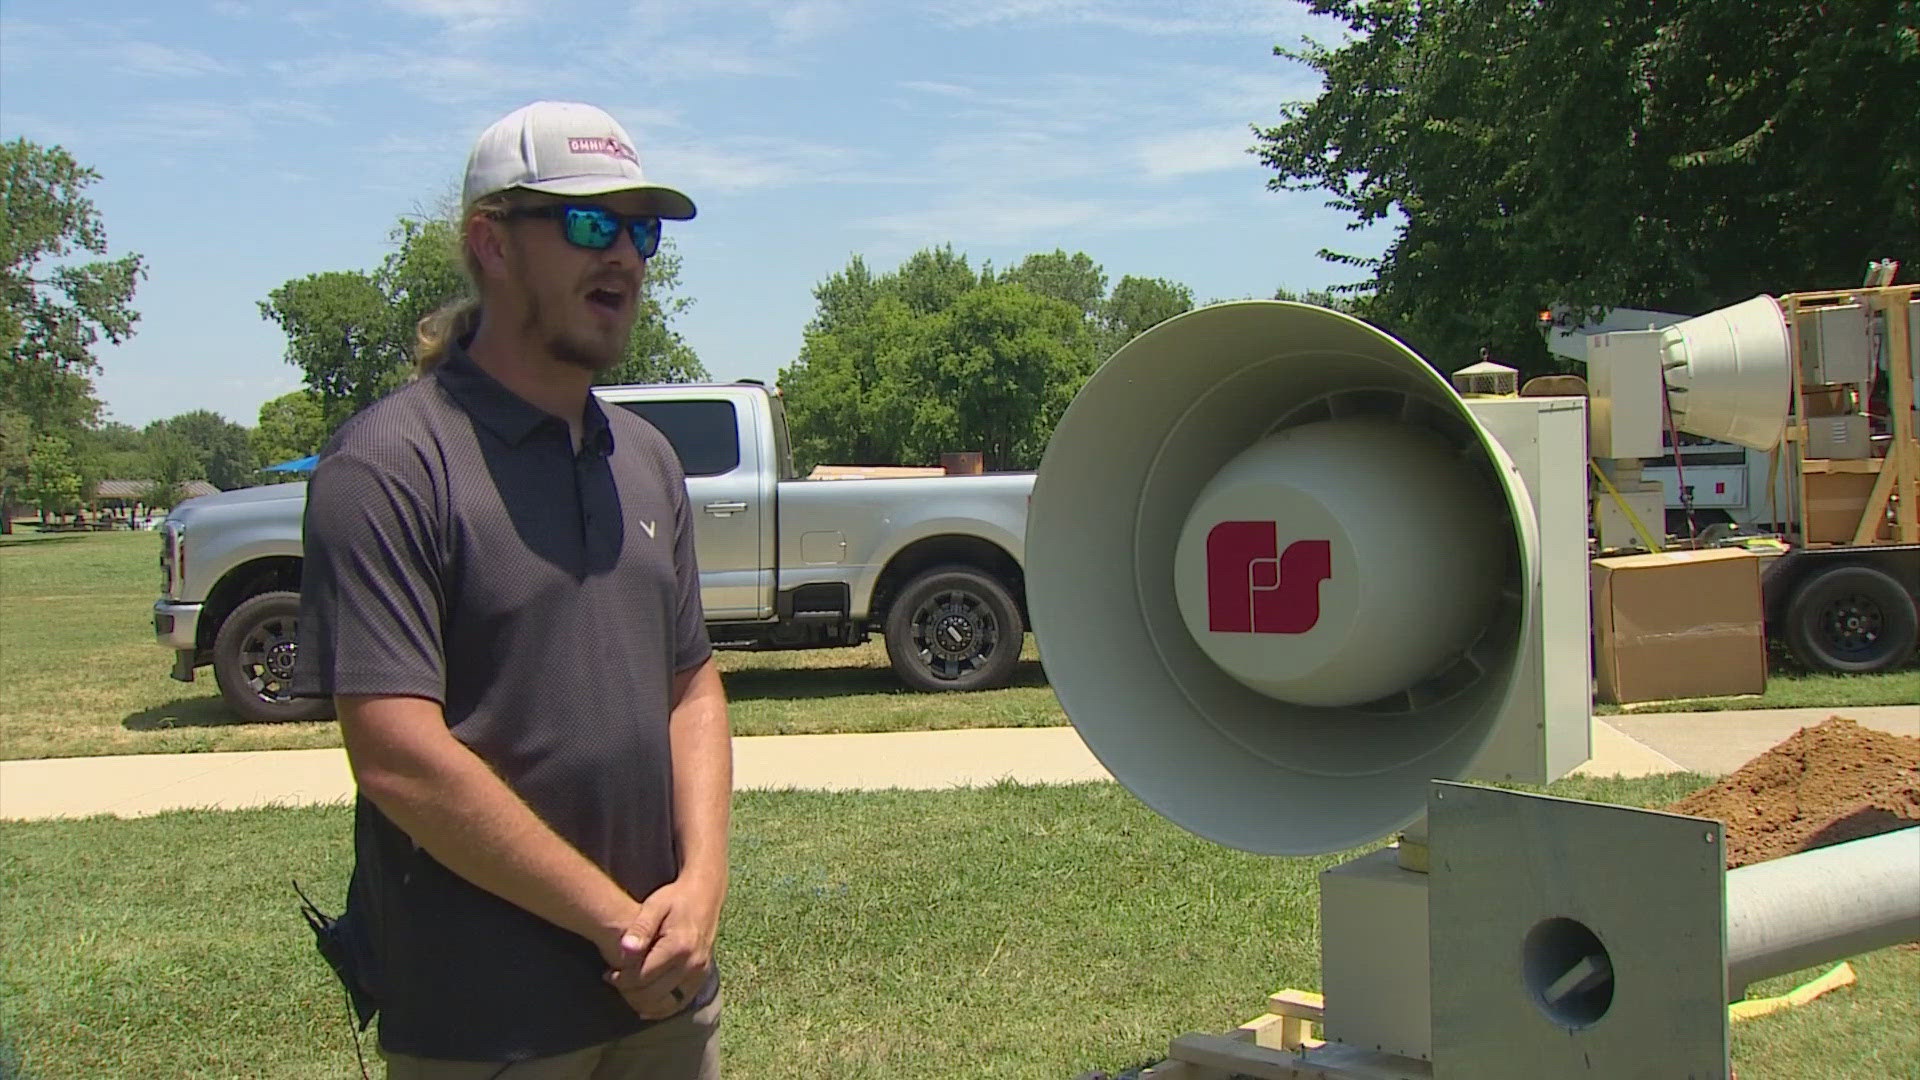 North Richland Hills replacing, relocating some outdoor warning sirens